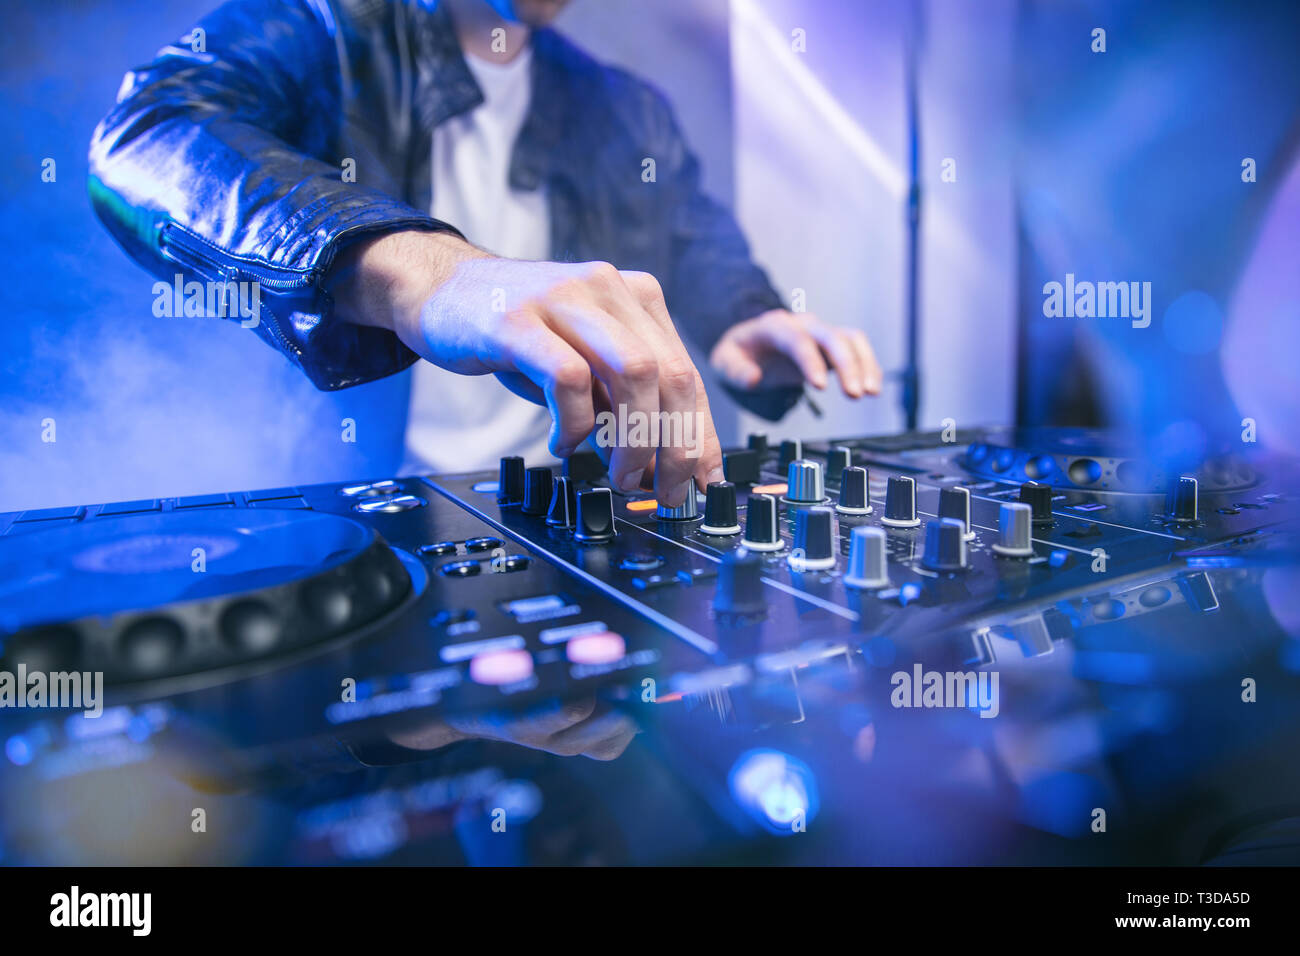 Dj Mixing At Party Festival With Blue Lights And Smoke In